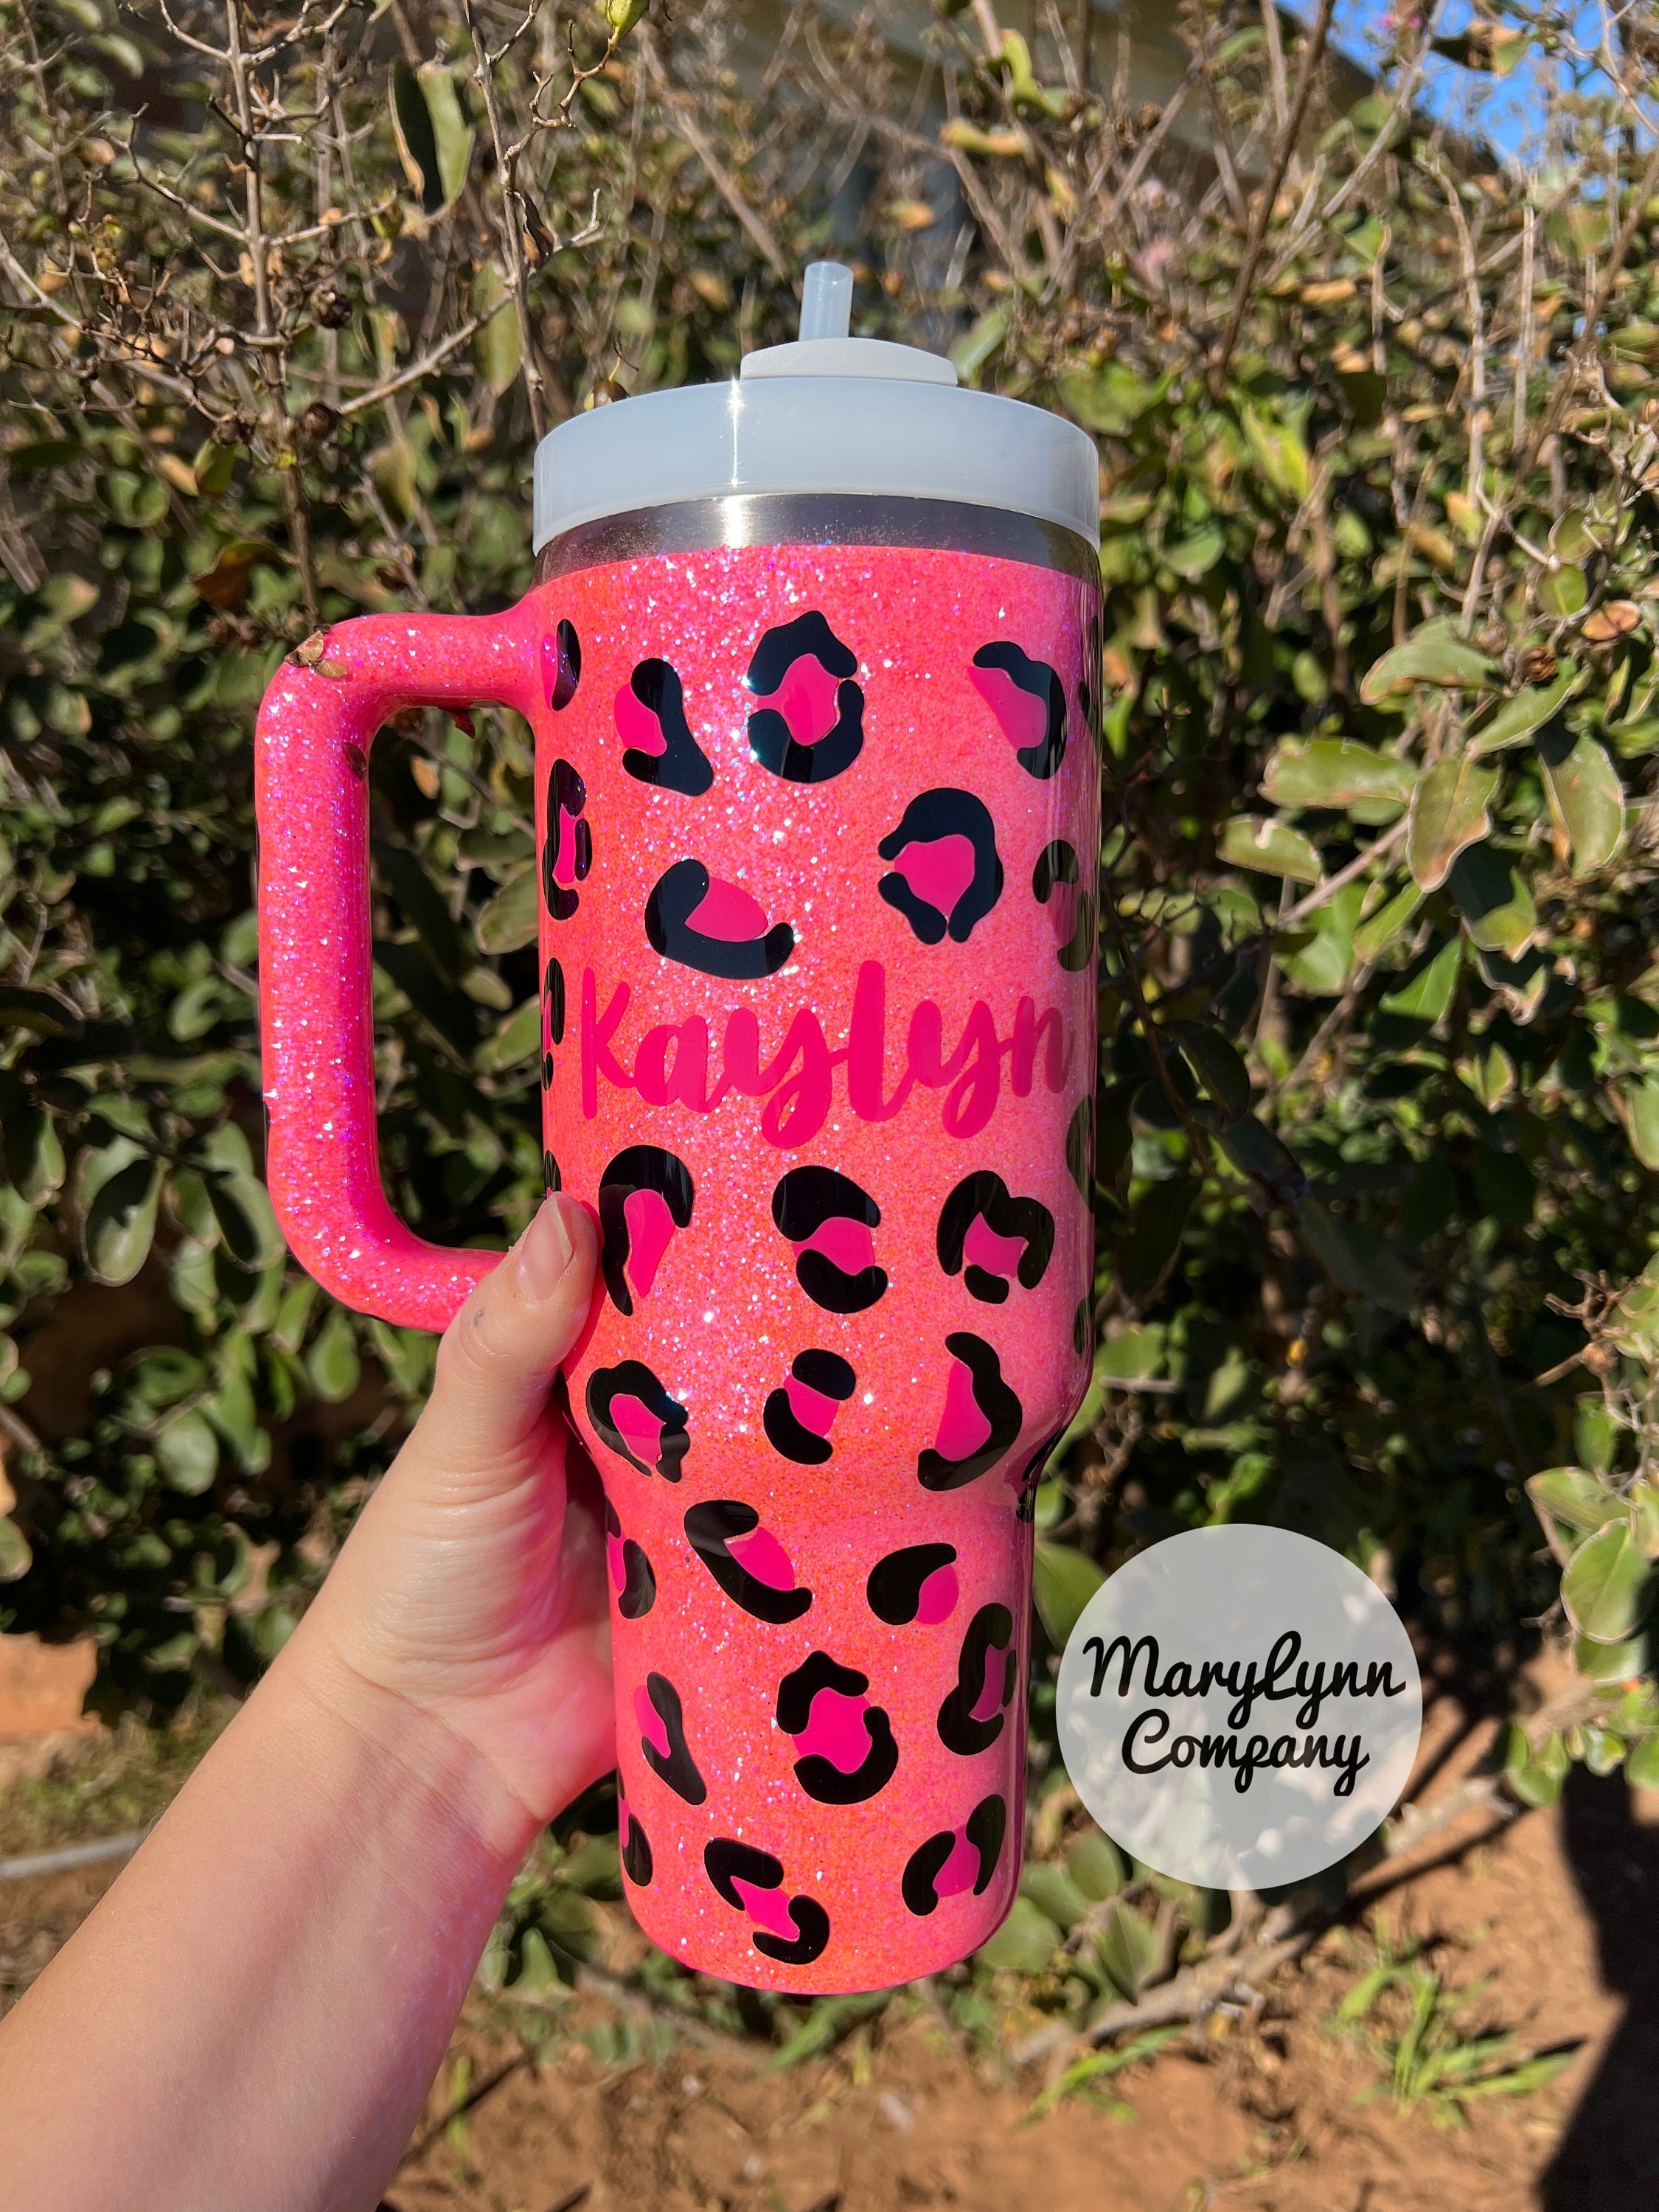 Hot Pink Stanley Tumbler Sticker for Sale by mohepdesigns